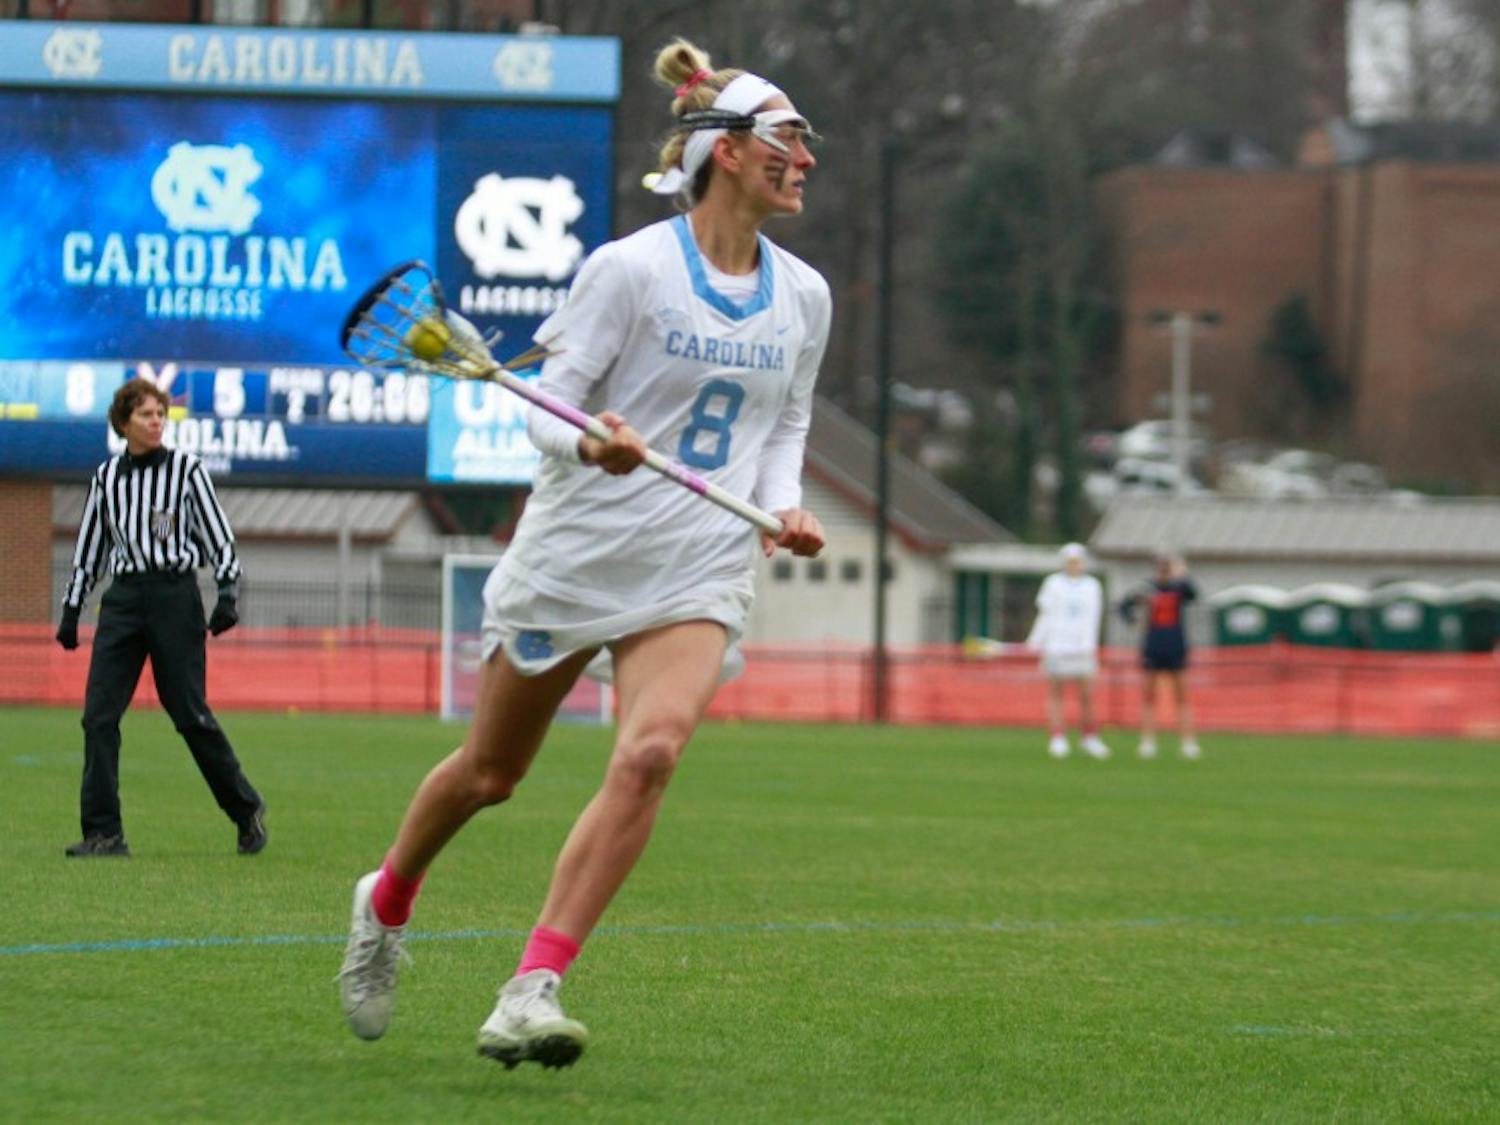 Team captain and third-year attacker Katie Hoeg (8) plays during ACC kick-off game against UVA. UNC won 13-12 at Fetzer Field in Chapel Hill on March 9, 2019.